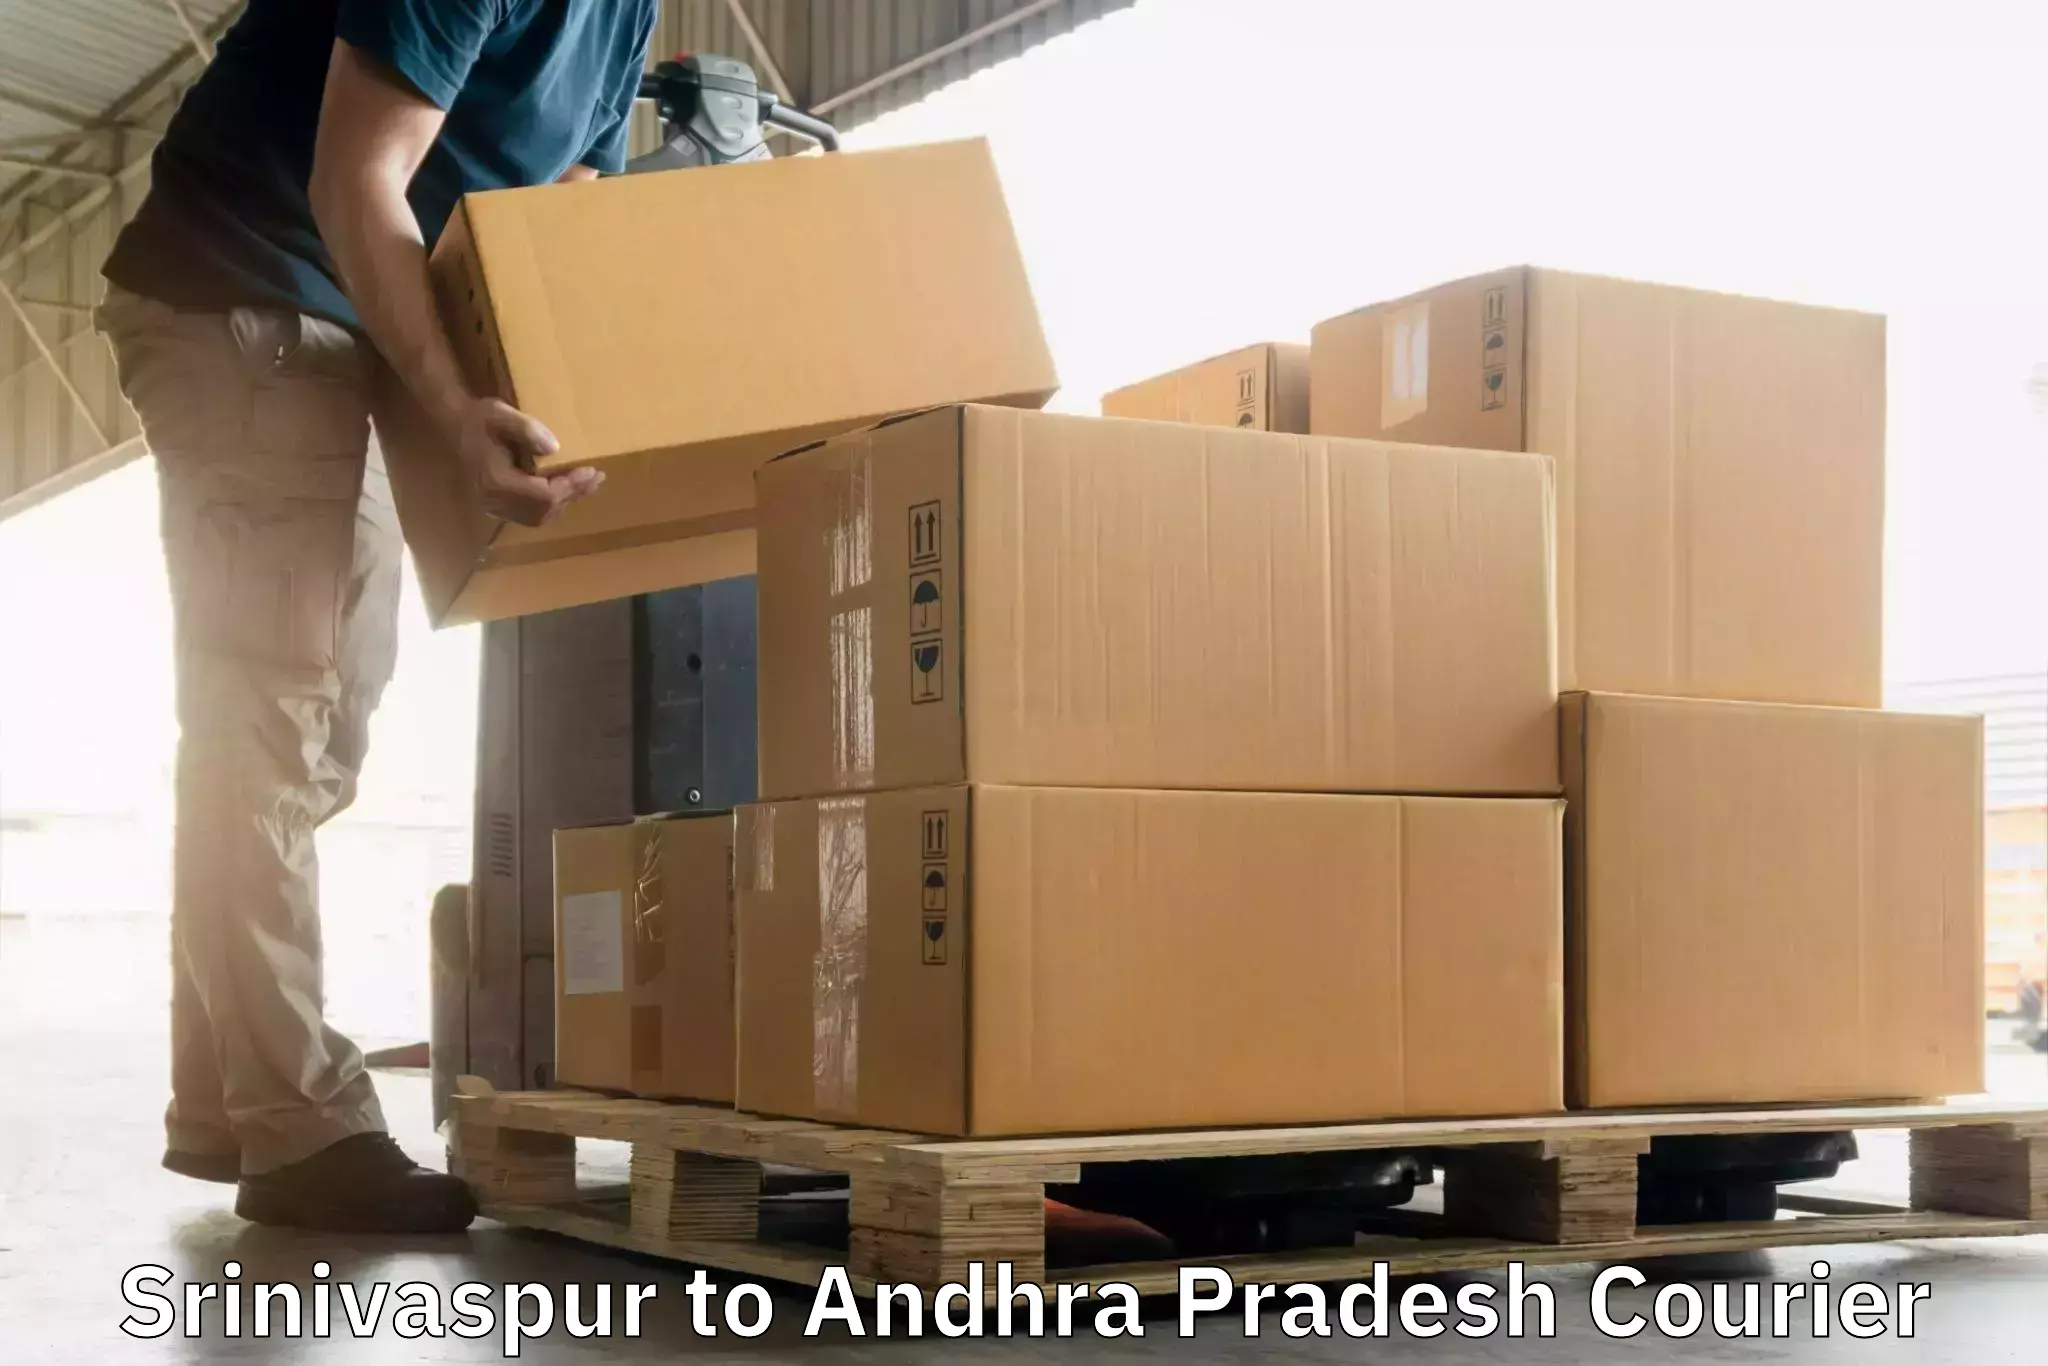 Local courier options in Srinivaspur to Andhra Pradesh